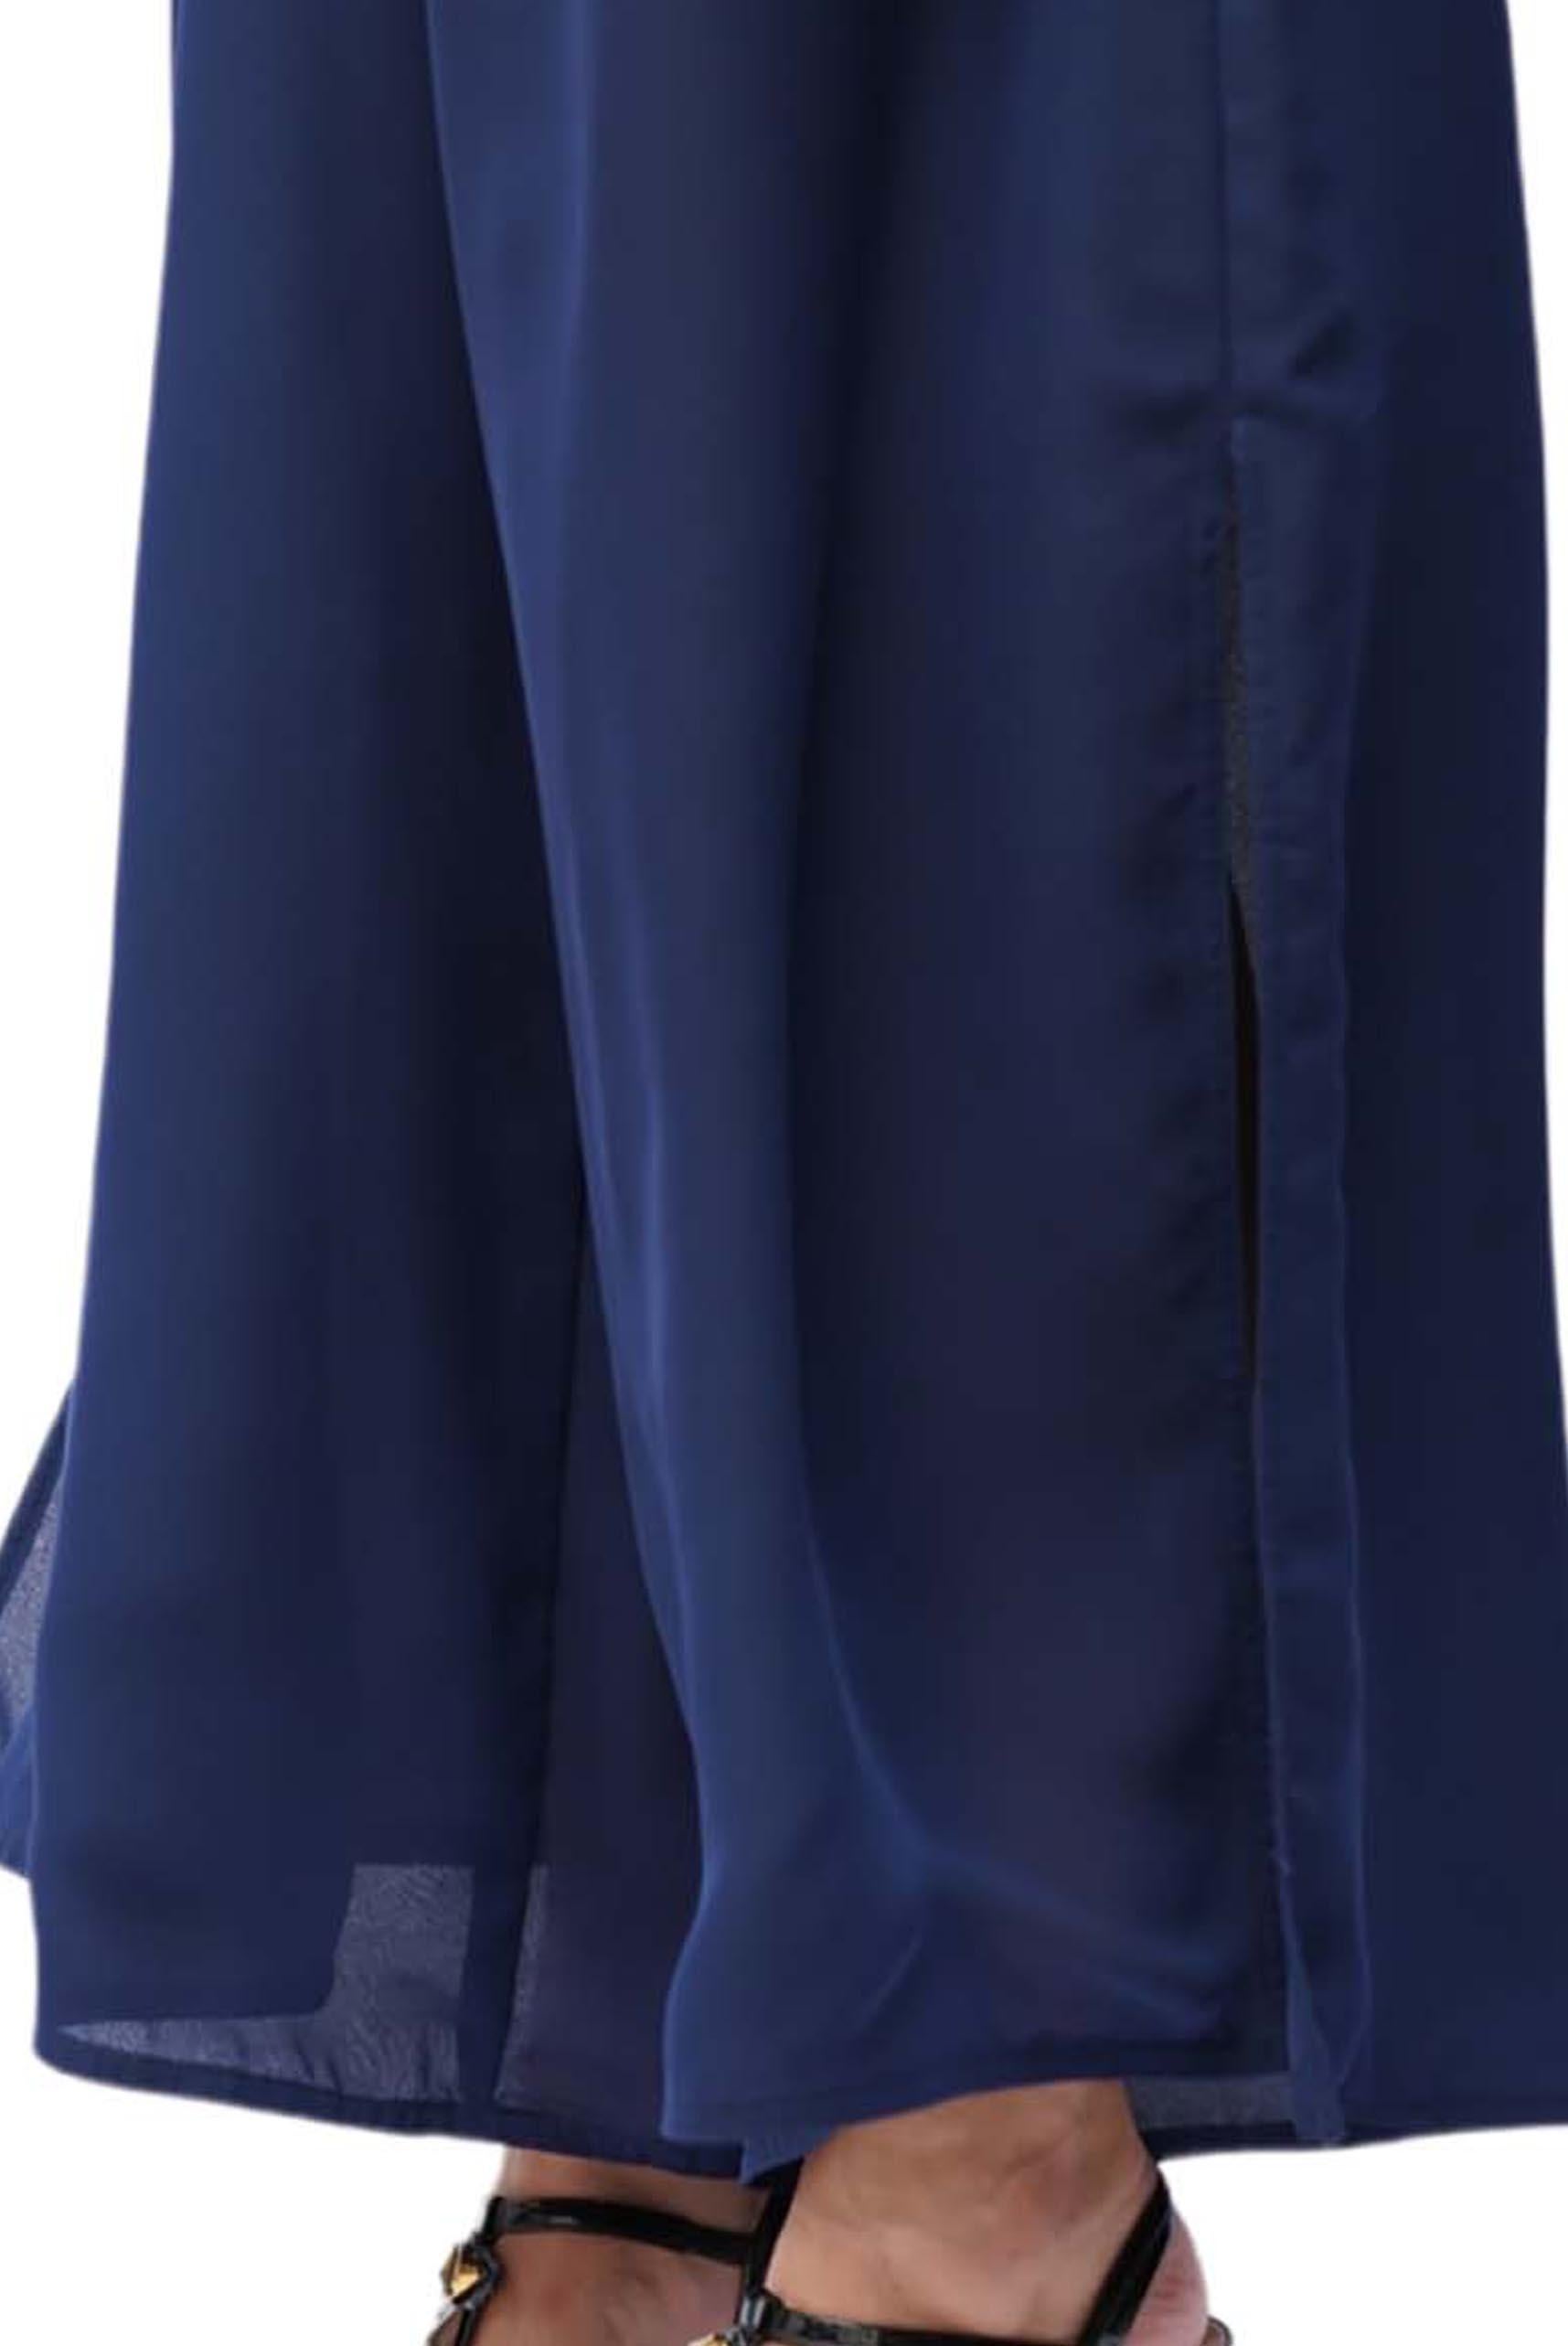 1970S Navy Blue Polyester Chiffon Pants For Sale 3